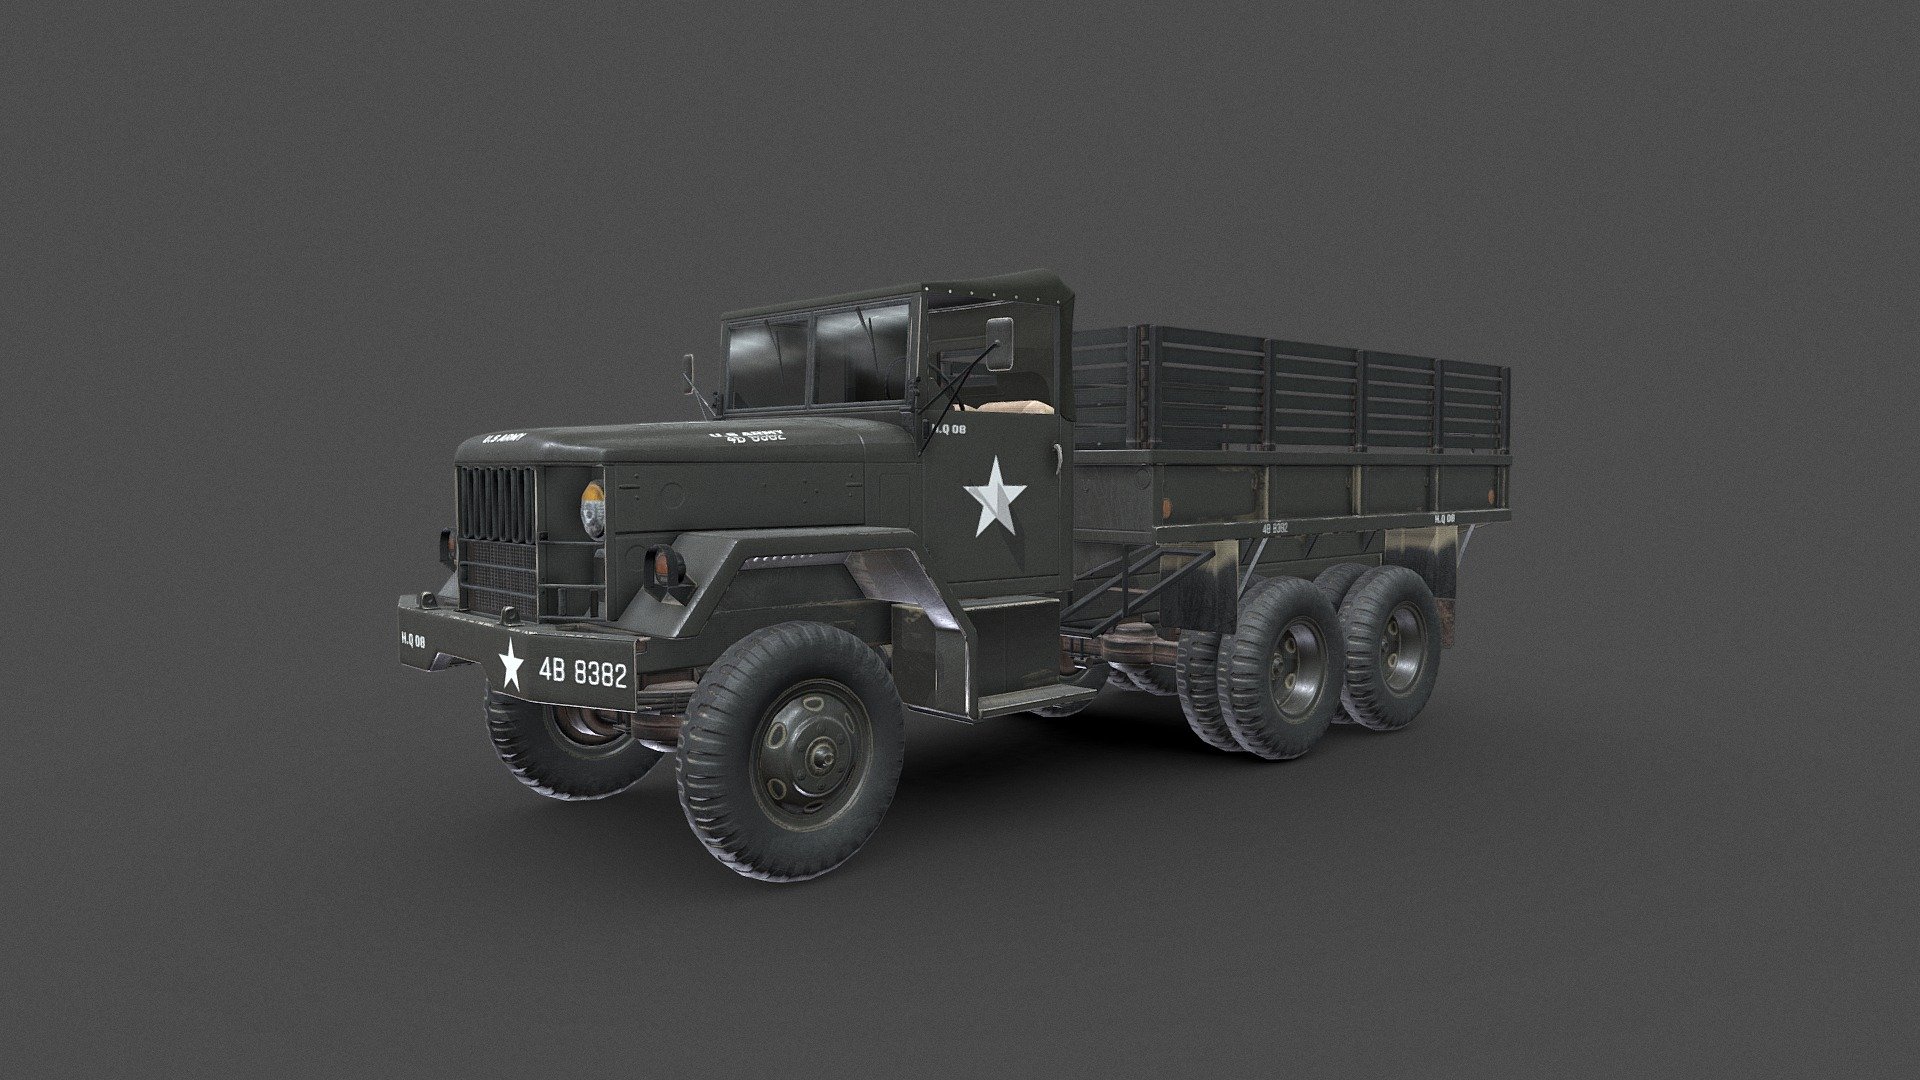 M35 Military Cargo Truck




-Low-poly ready to use in Games, AR/VR (19,555 Tris)

-Created in 3ds MAX 2018 no plugins used.

-Textures are in PNG format 4096x4096 PBR metalness 1 set.

-Files unit: Centimeters

-Available formats: MAX 2018 and 2015, OBJ, MTL, FBX, .tbscene.

-If you need any other file format you can always request it.

-All formats include materials and textures.
 - M35 Military Cargo Truck Low-poly - Buy Royalty Free 3D model by MaX3Dd 3d model